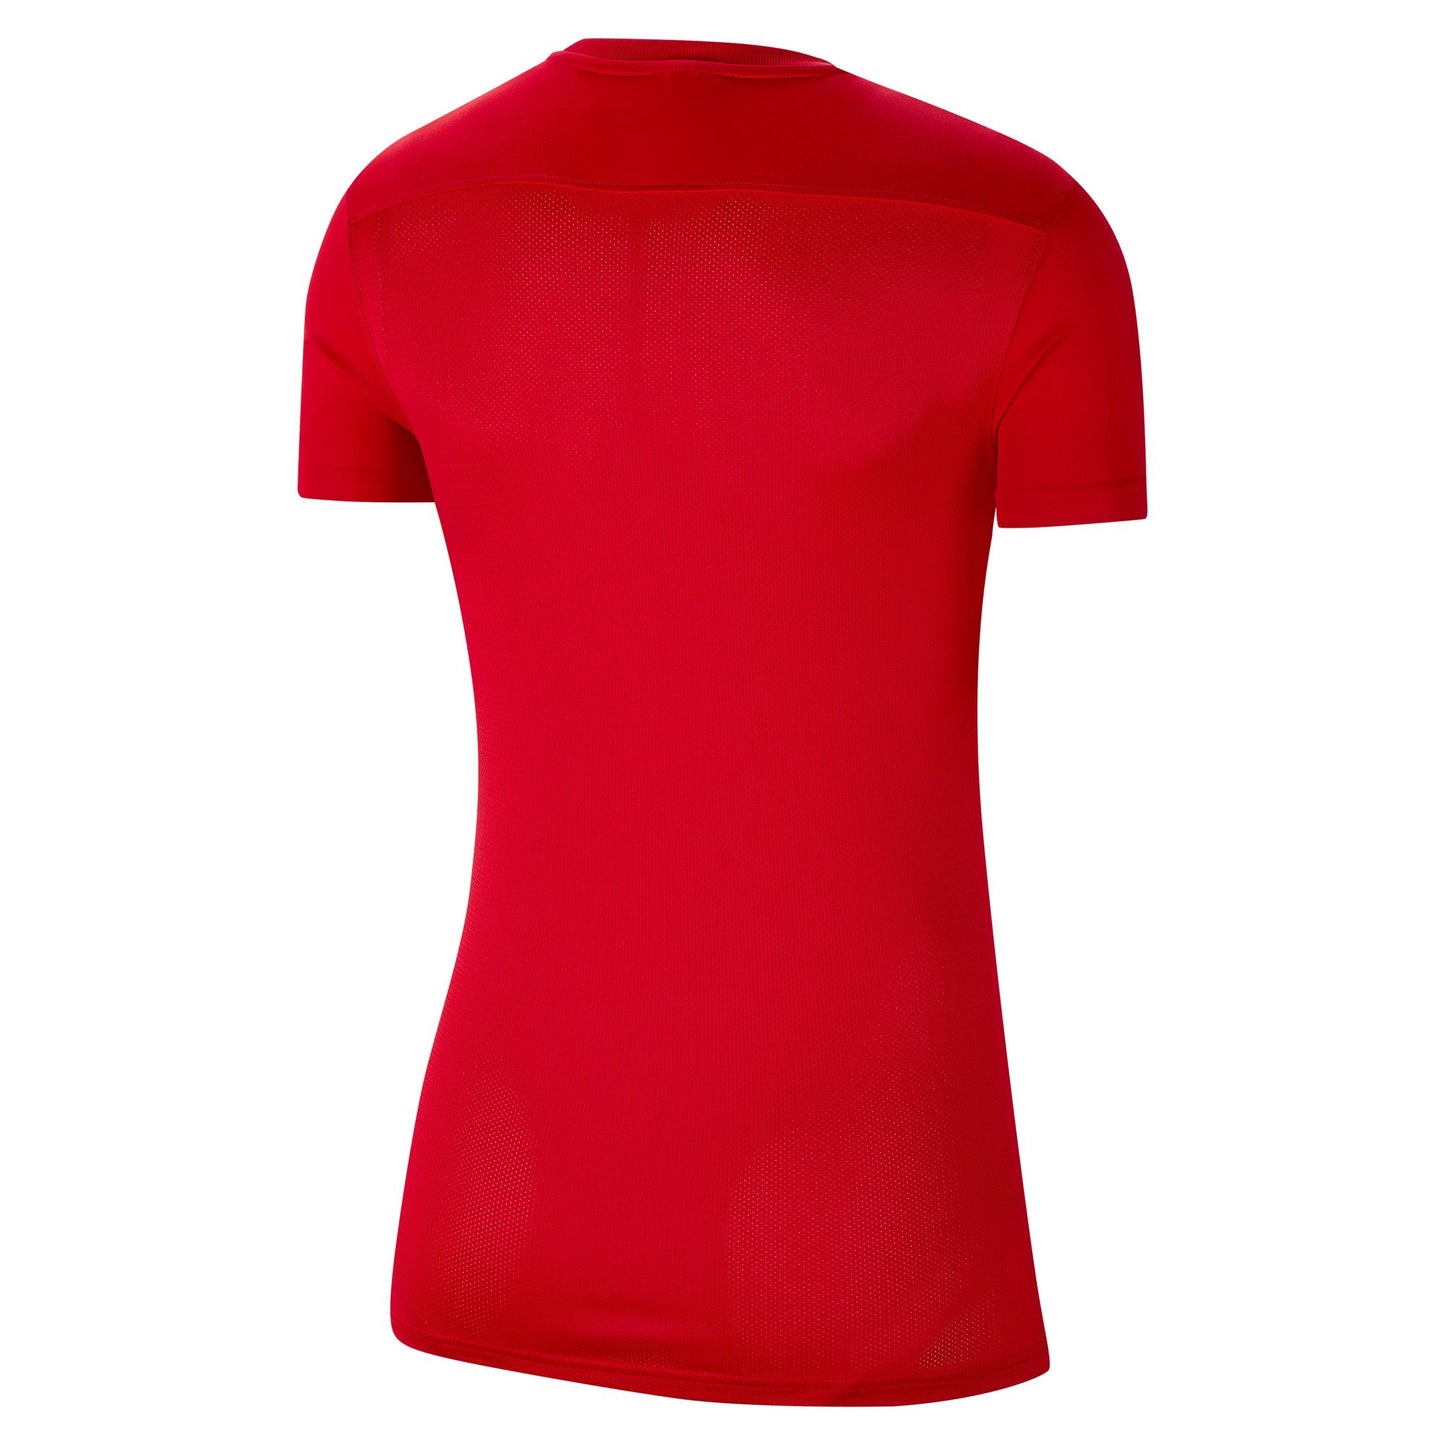 SOUTHERN DRAGONS NIKE PARK VII RED JERSEY - WOMEN'S